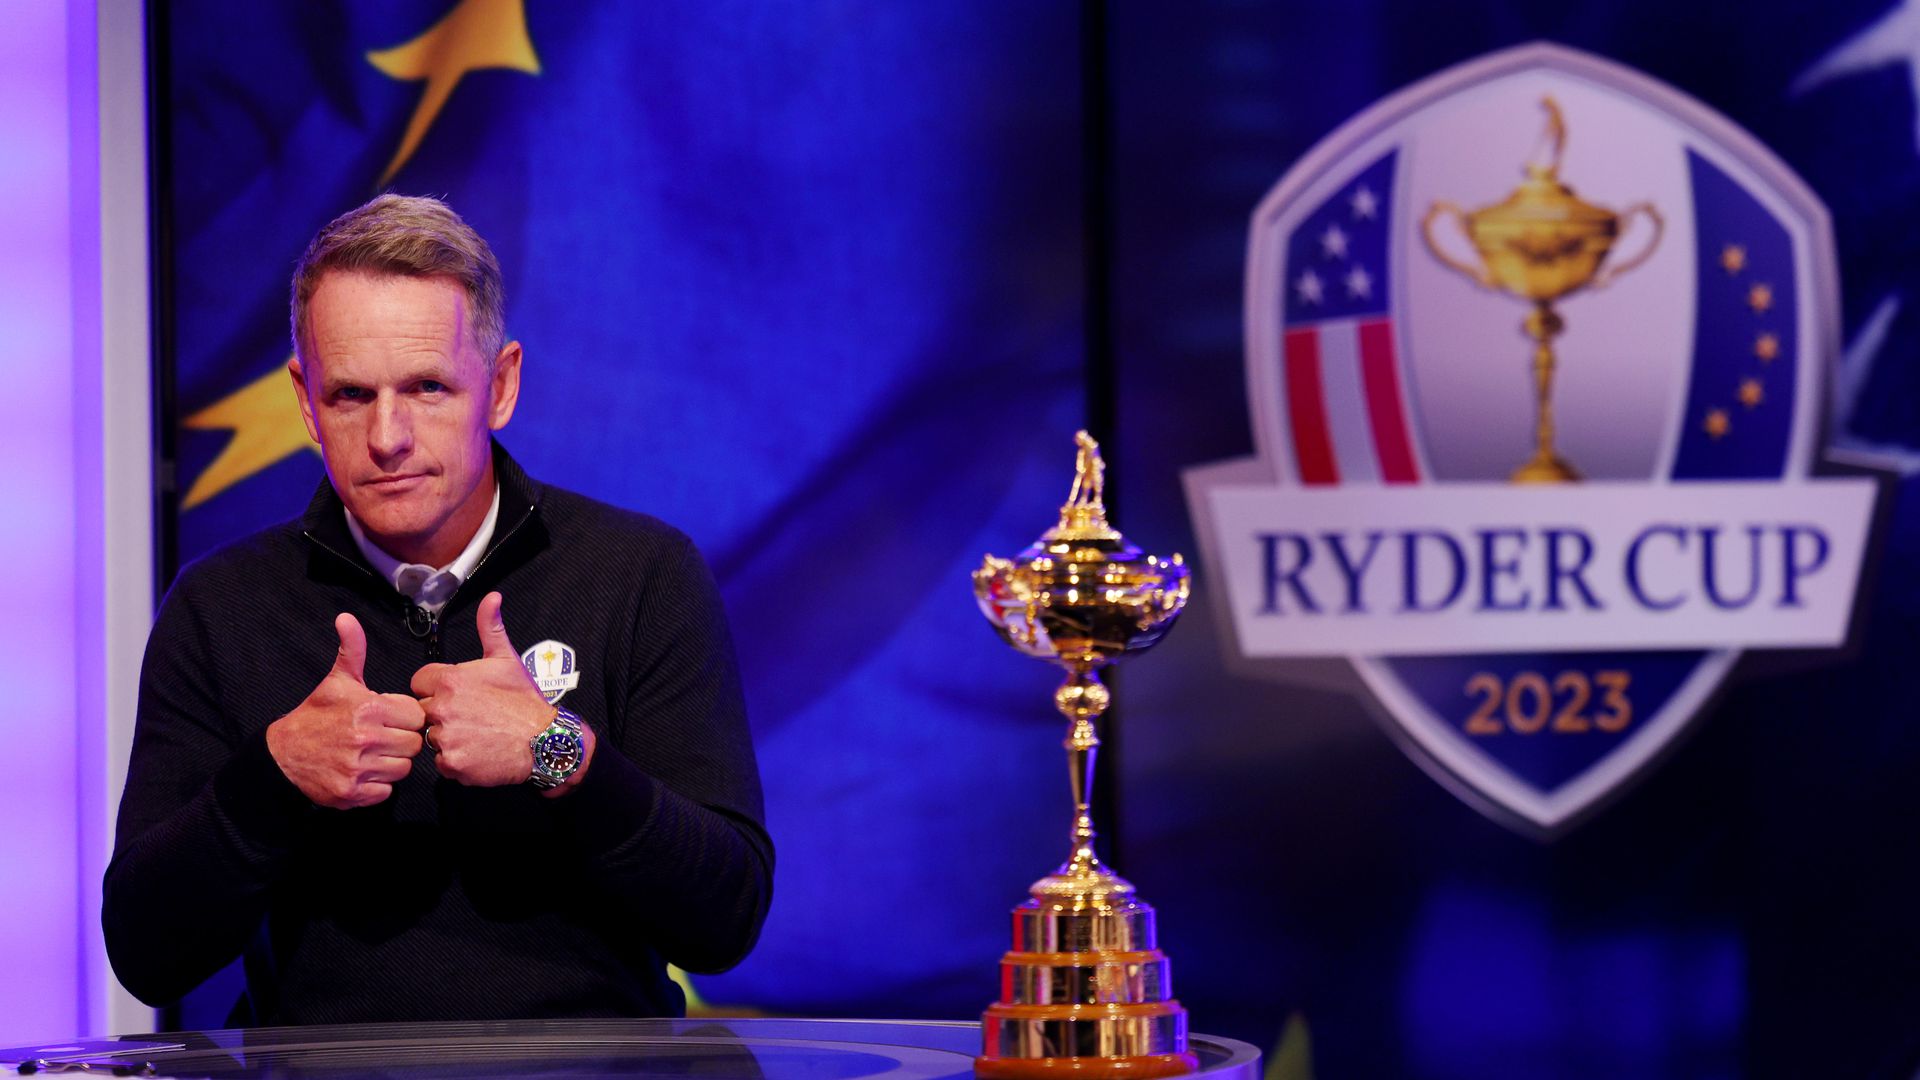 Ryder Cup Team Europe’s Luke Donald pulls a fast one leaving Adrian